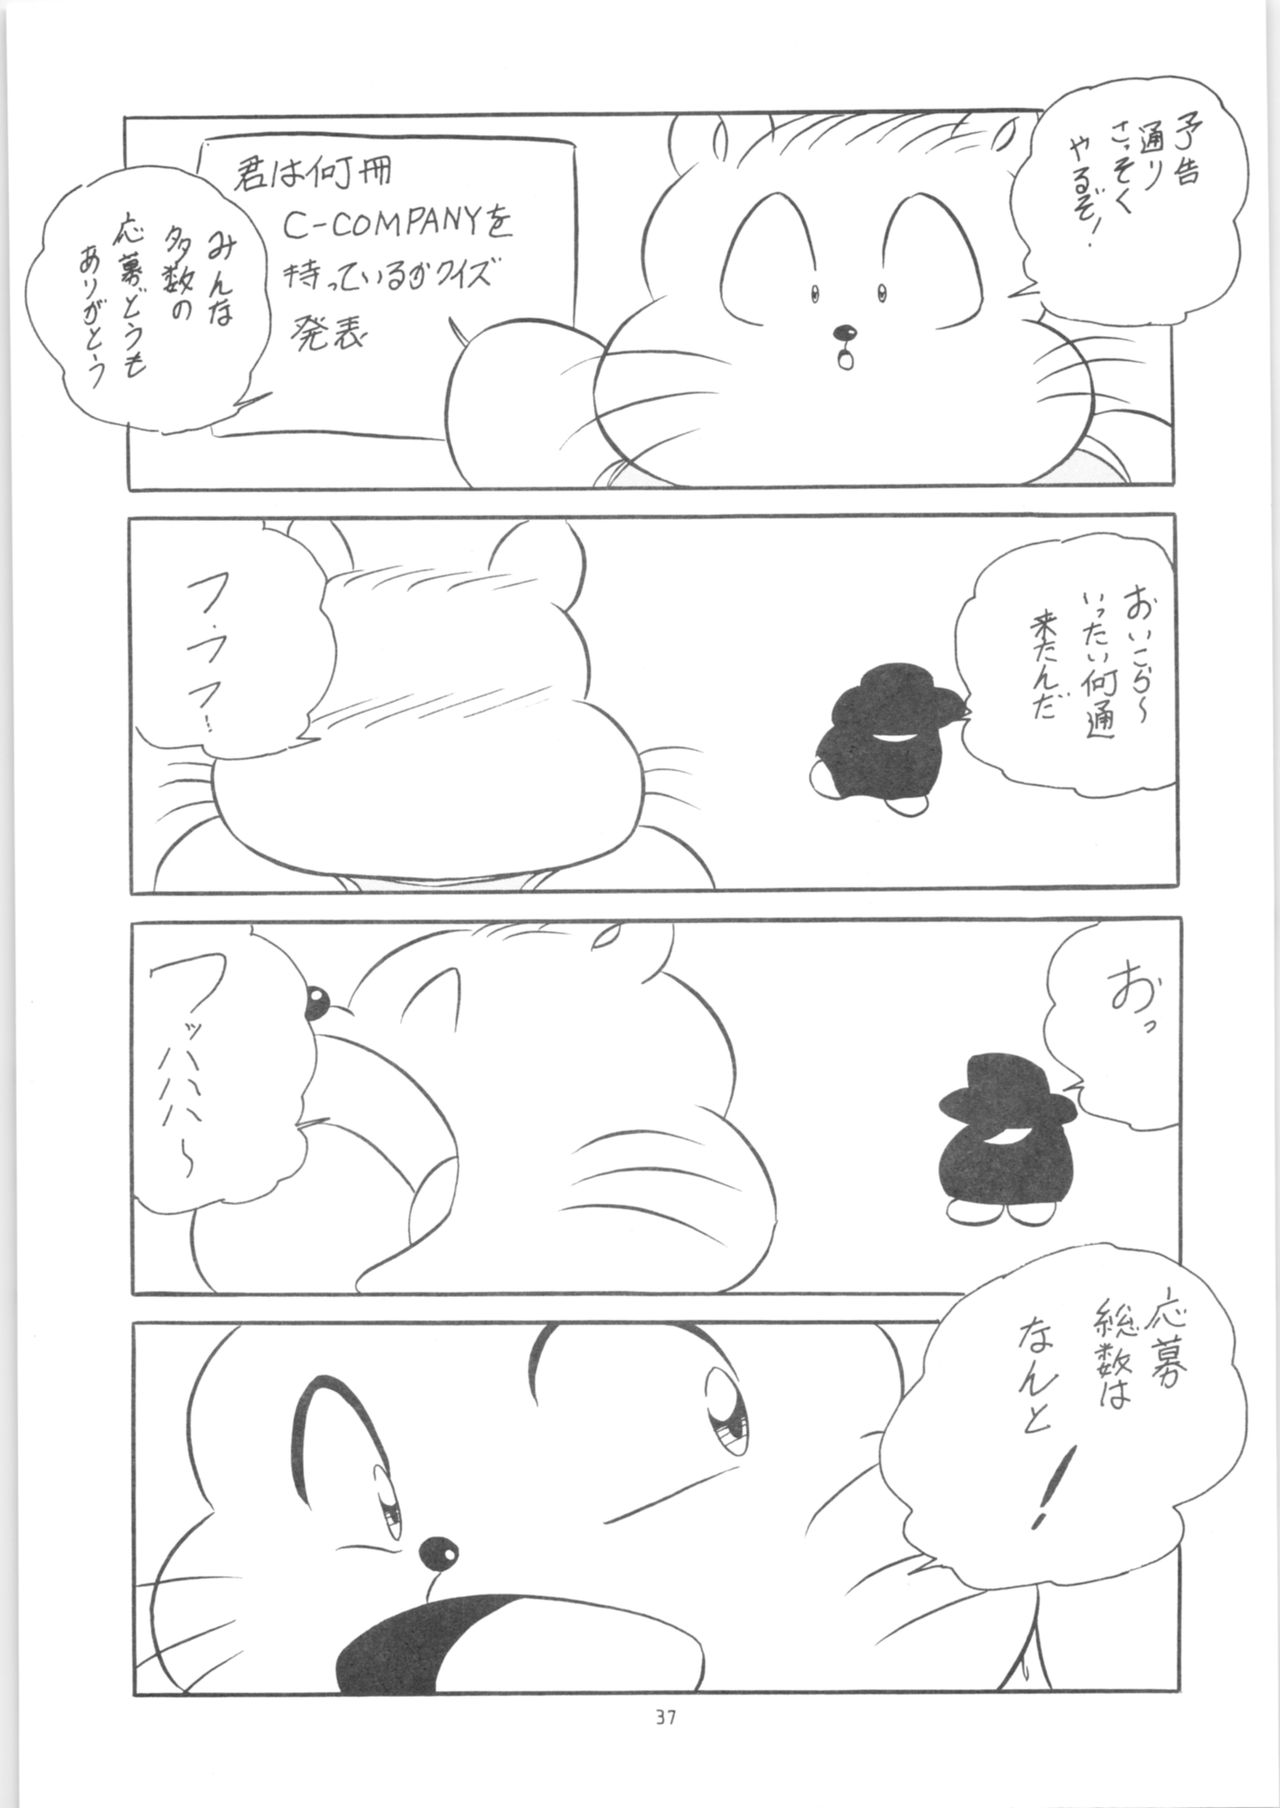 [C-COMPANY] C-COMPANY SPECIAL STAGE 13 (Ranma 1/2) page 38 full